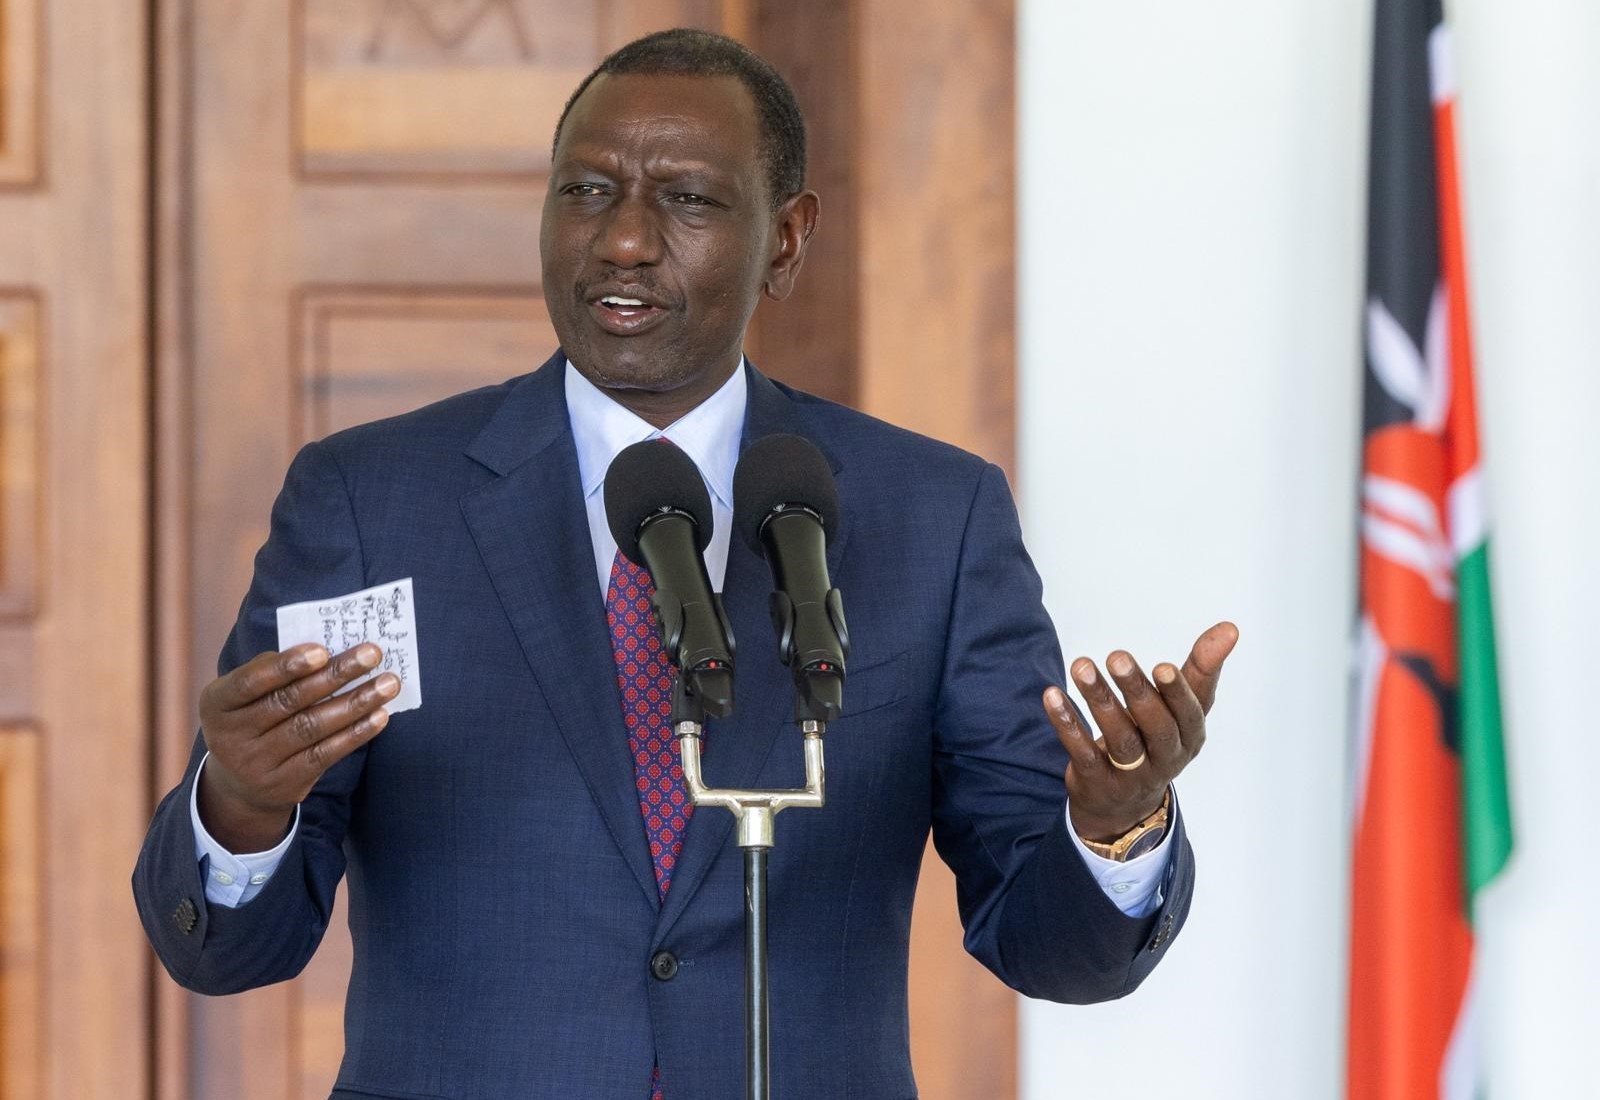 "We'll show up in Haiti the same way we've done in other countries," Ruto declares